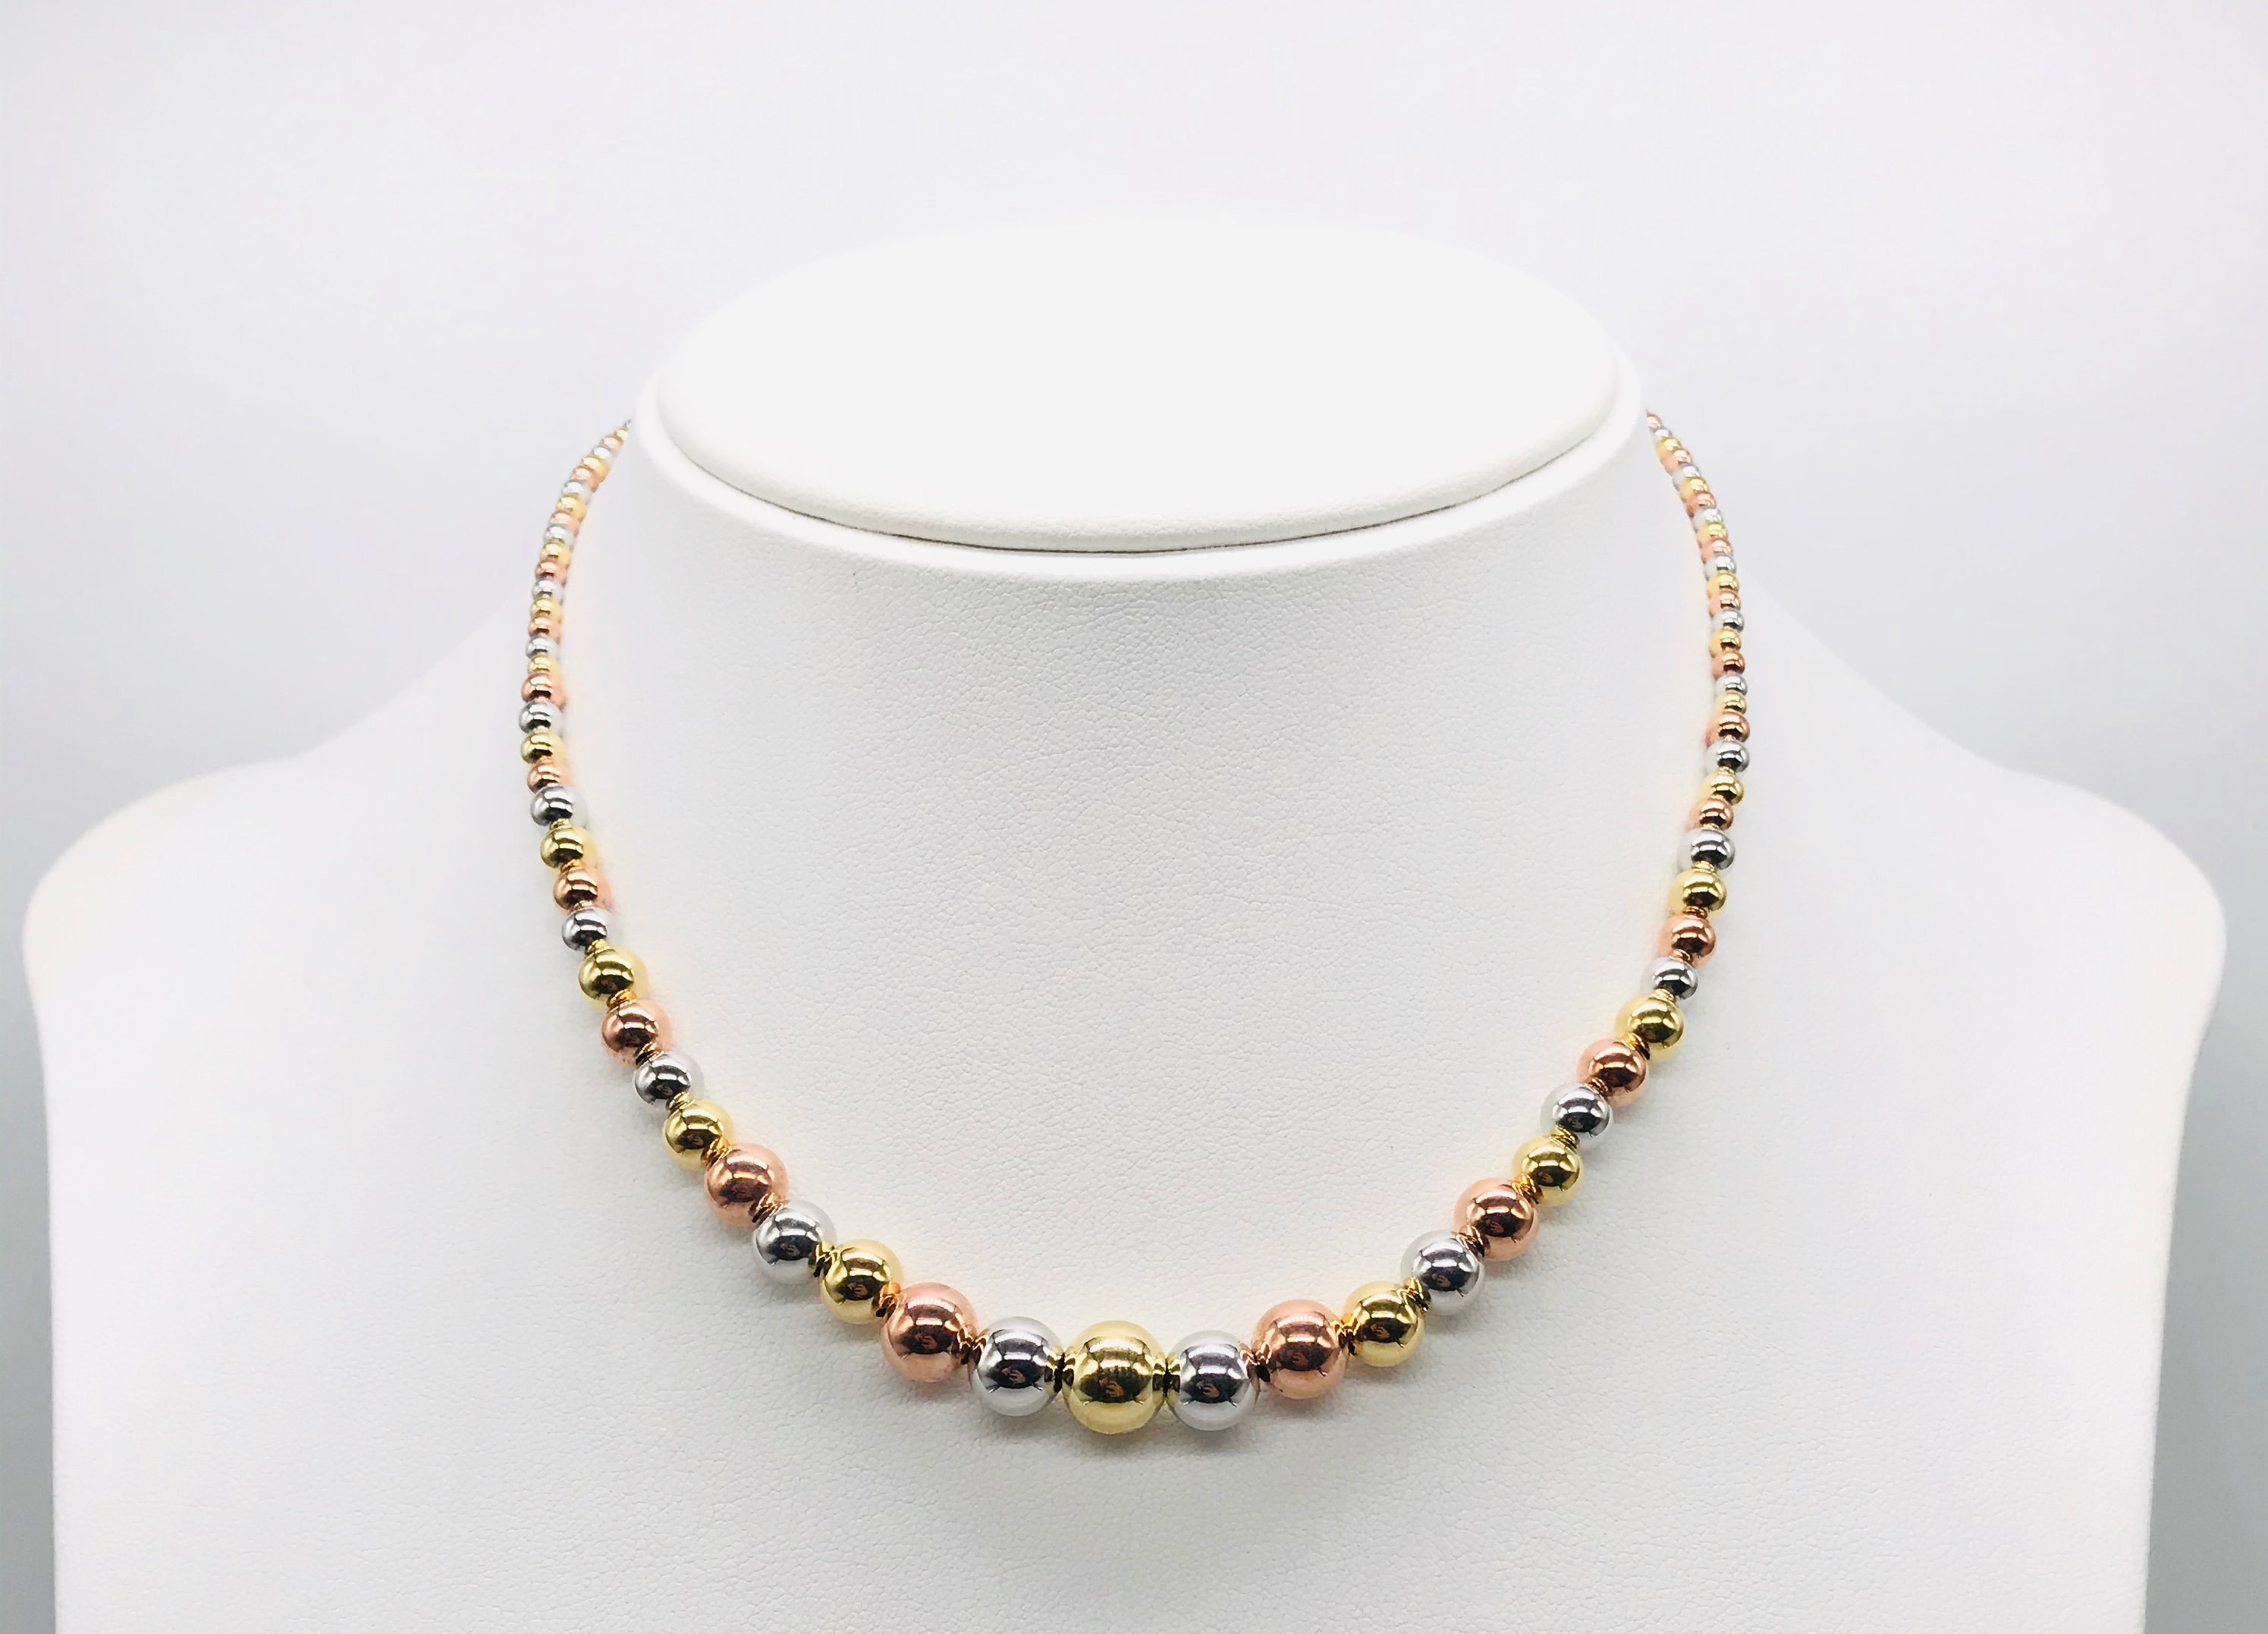 18K Yellow White & Rose Gold Necklace For Women Spheres Women's Necklace Tri-Color Beaded Great Gift Her